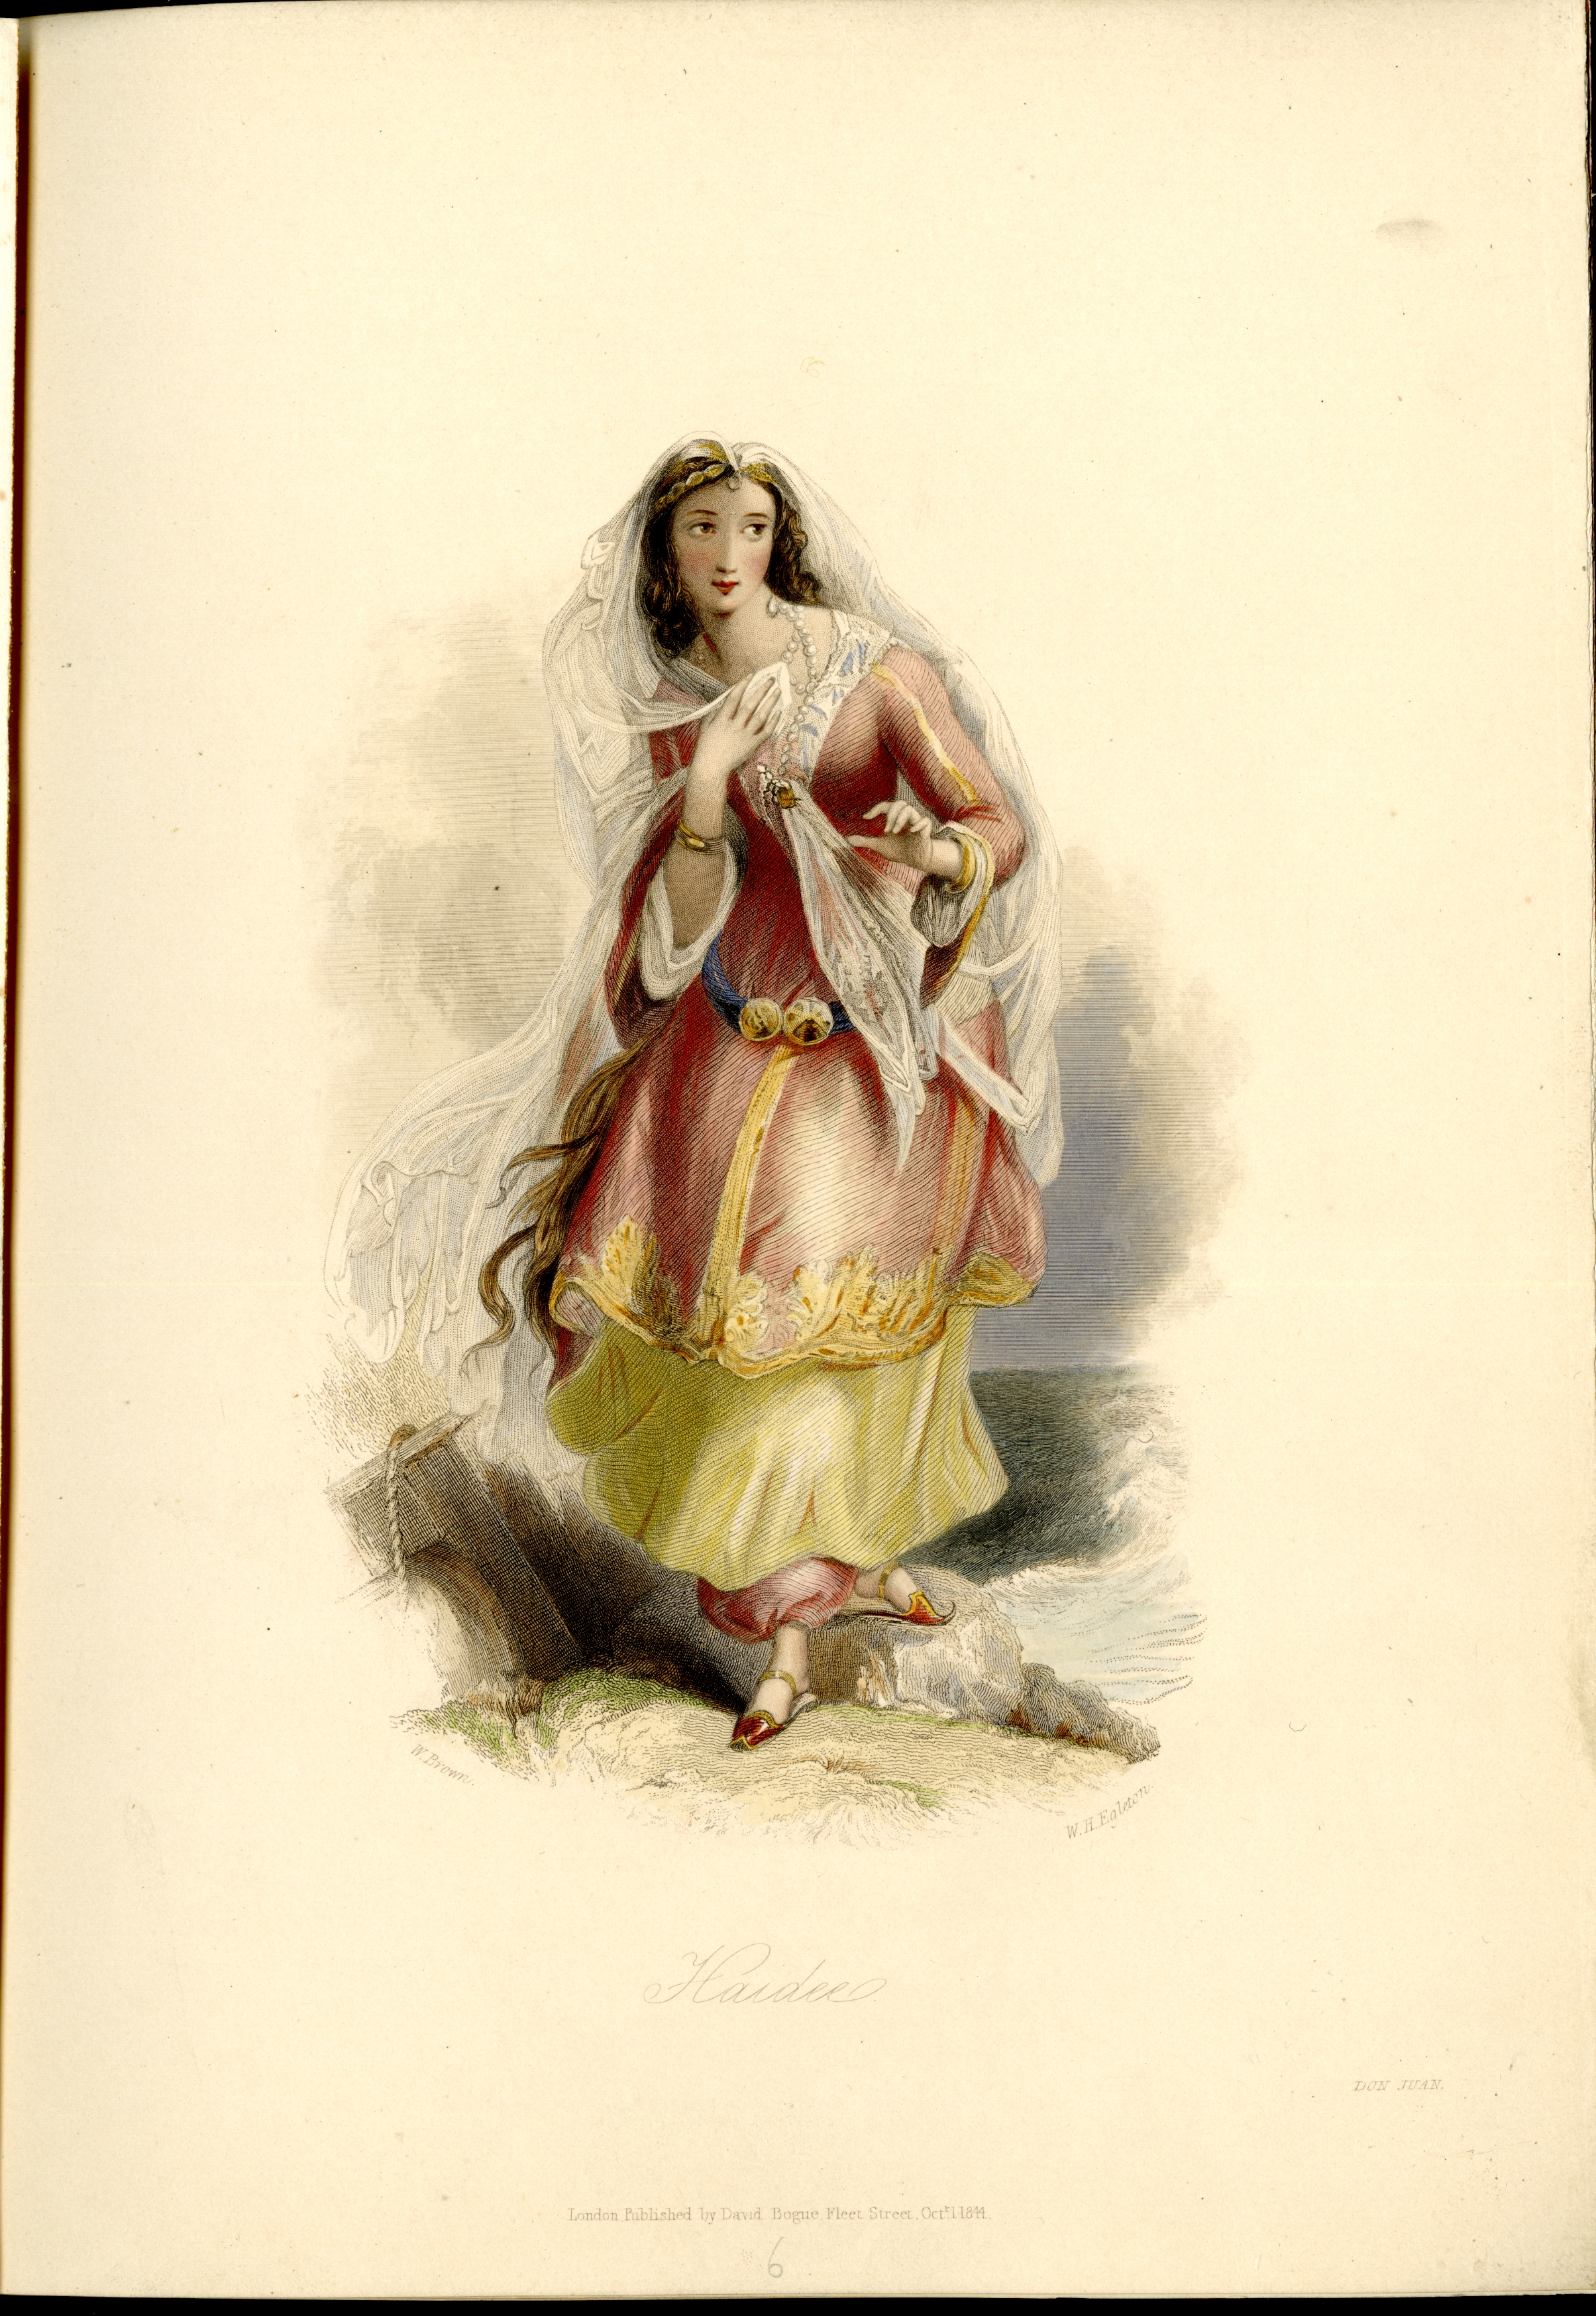 Coloured drawing of a young woman in a red dress